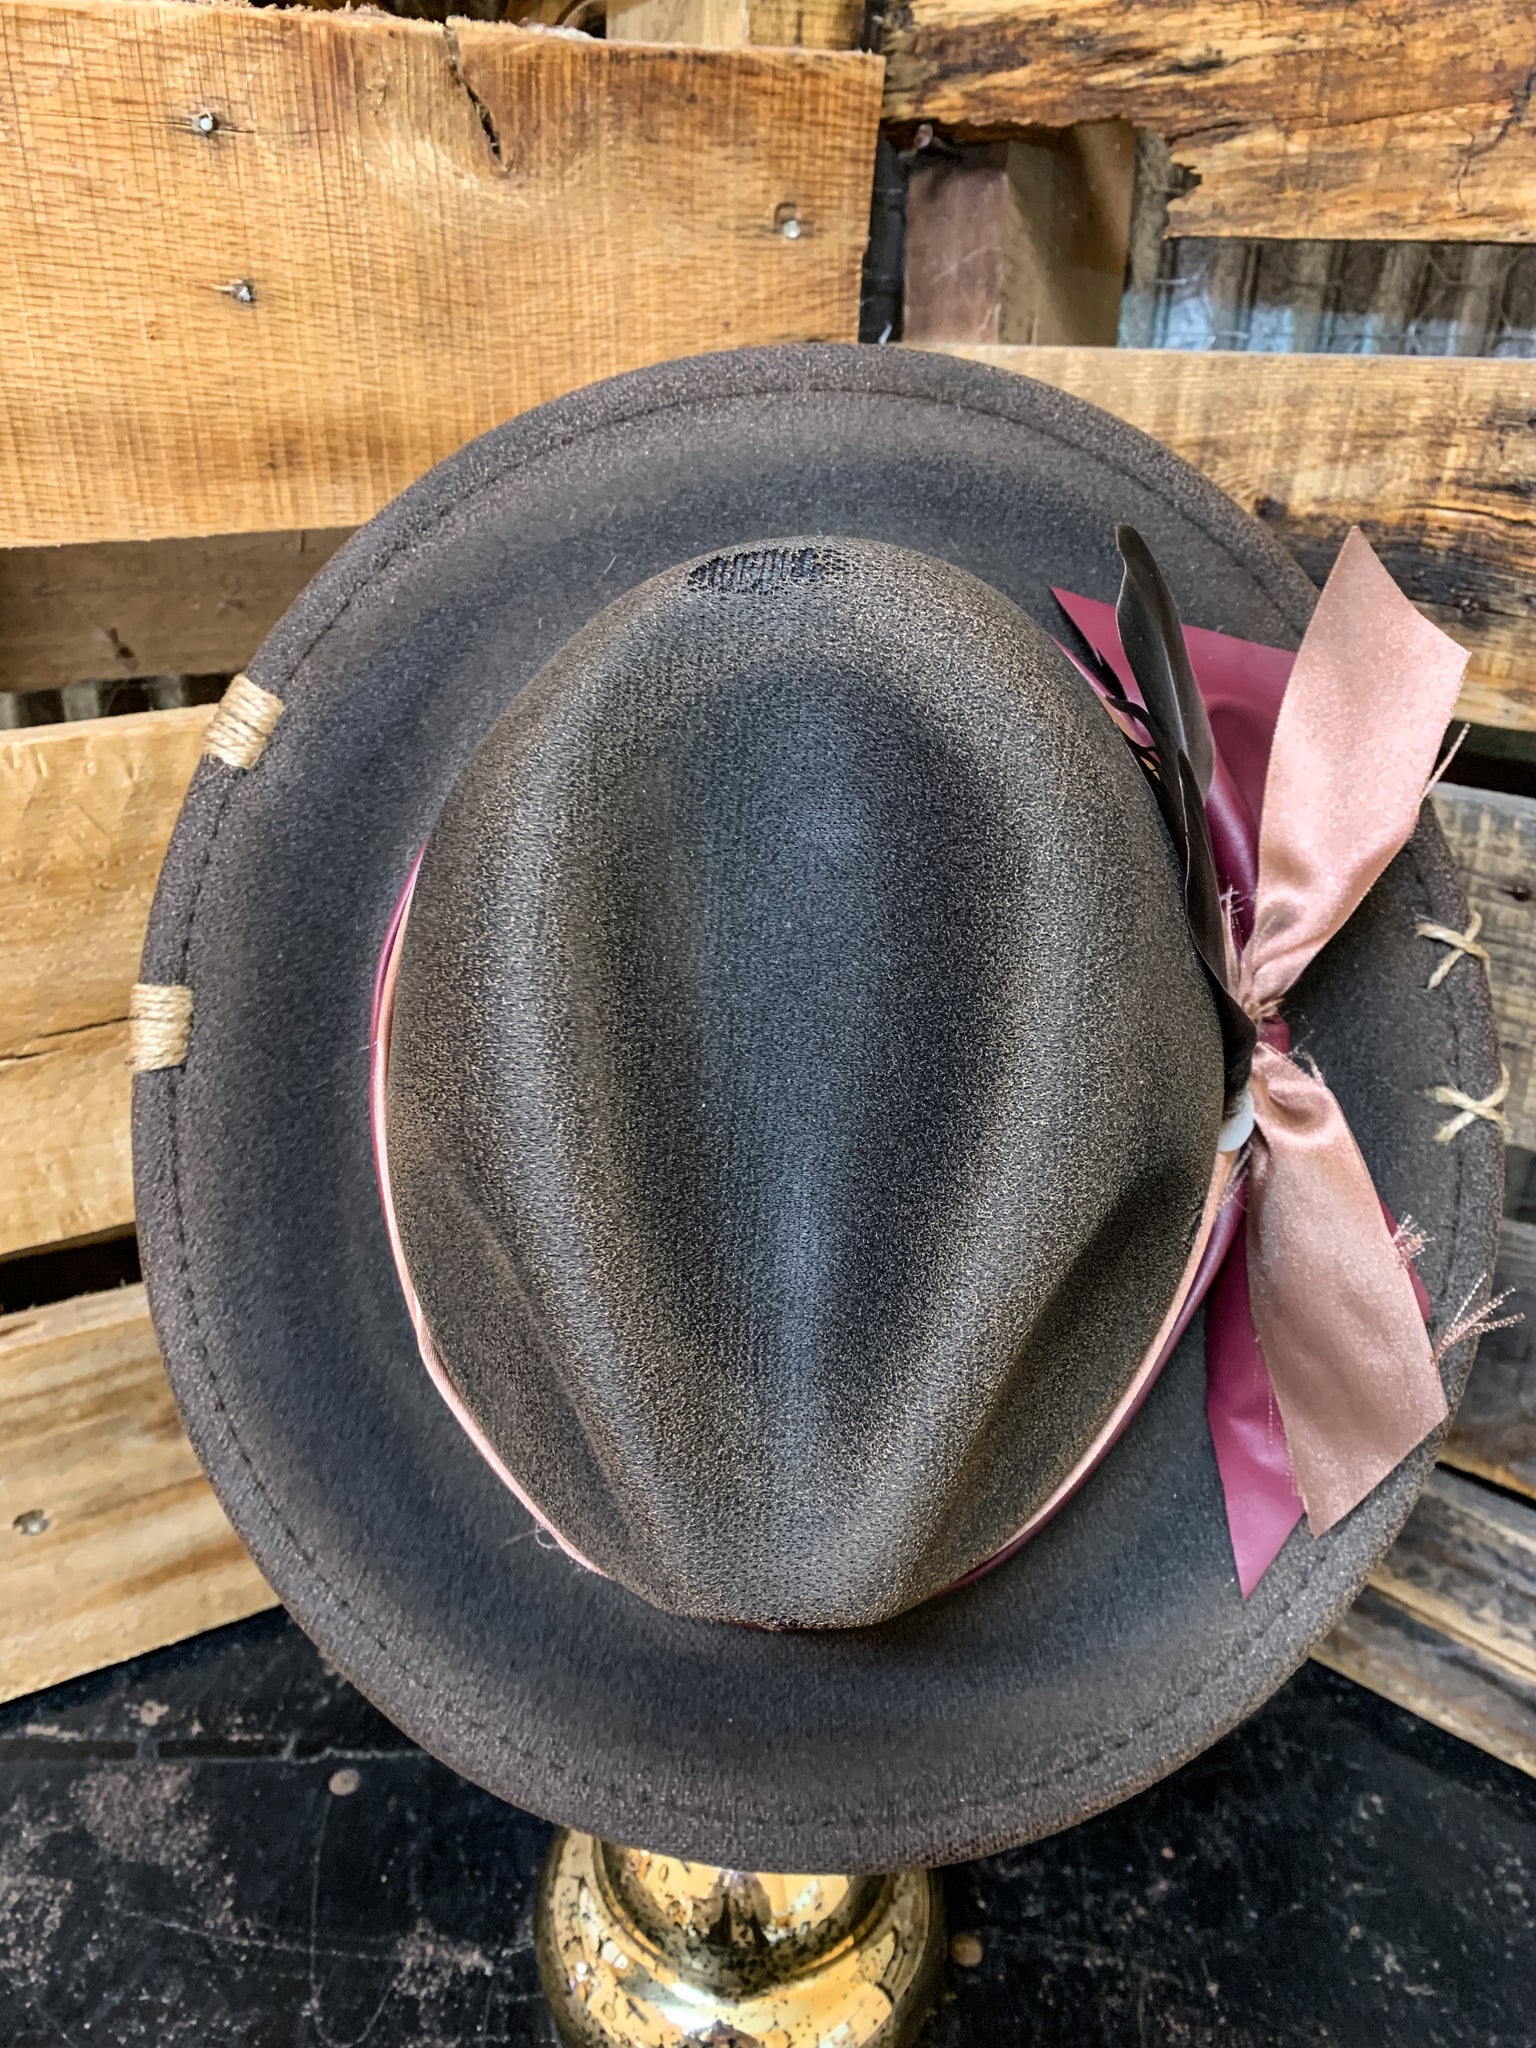 Country Chic Hat